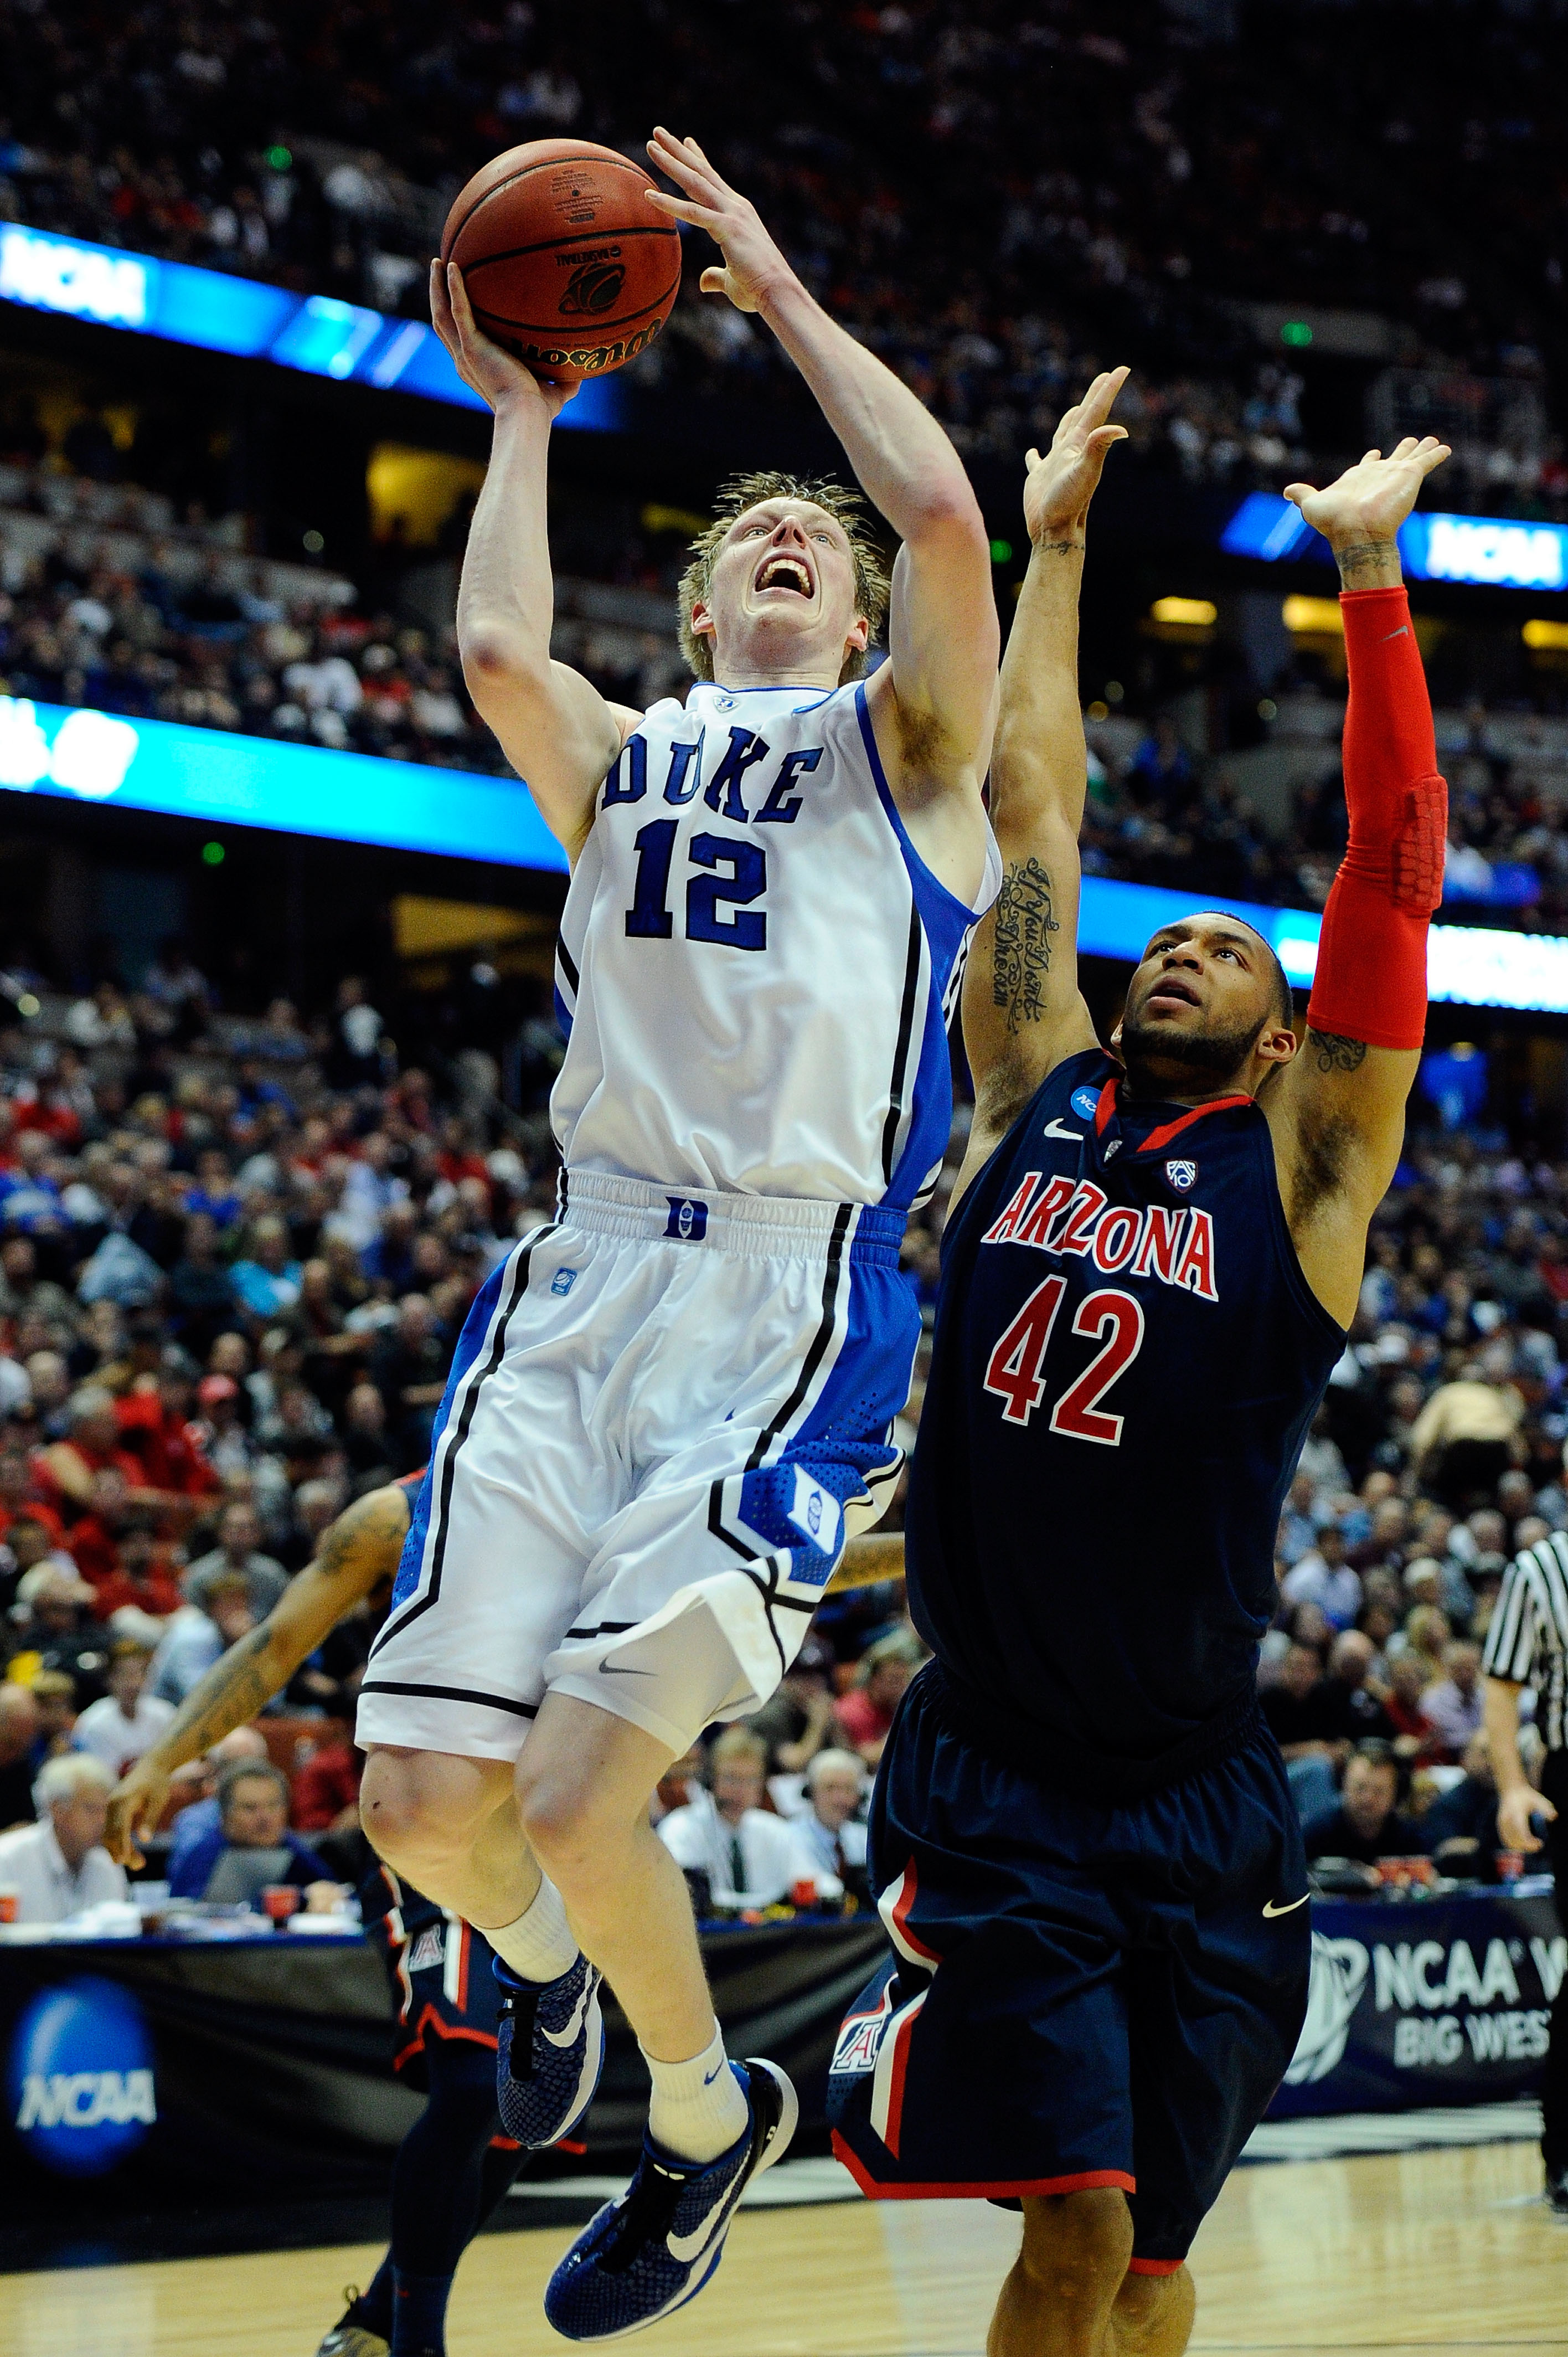 ANAHEIM, CA - MARCH 24:  Kyle Singler #12 of the Duke Blue Devils goes to the basket against Jamelle Horne #42 of the Arizona Wildcats during the west regional semifinal of the 2011 NCAA men's basketball tournament at the Honda Center on March 24, 2011 in